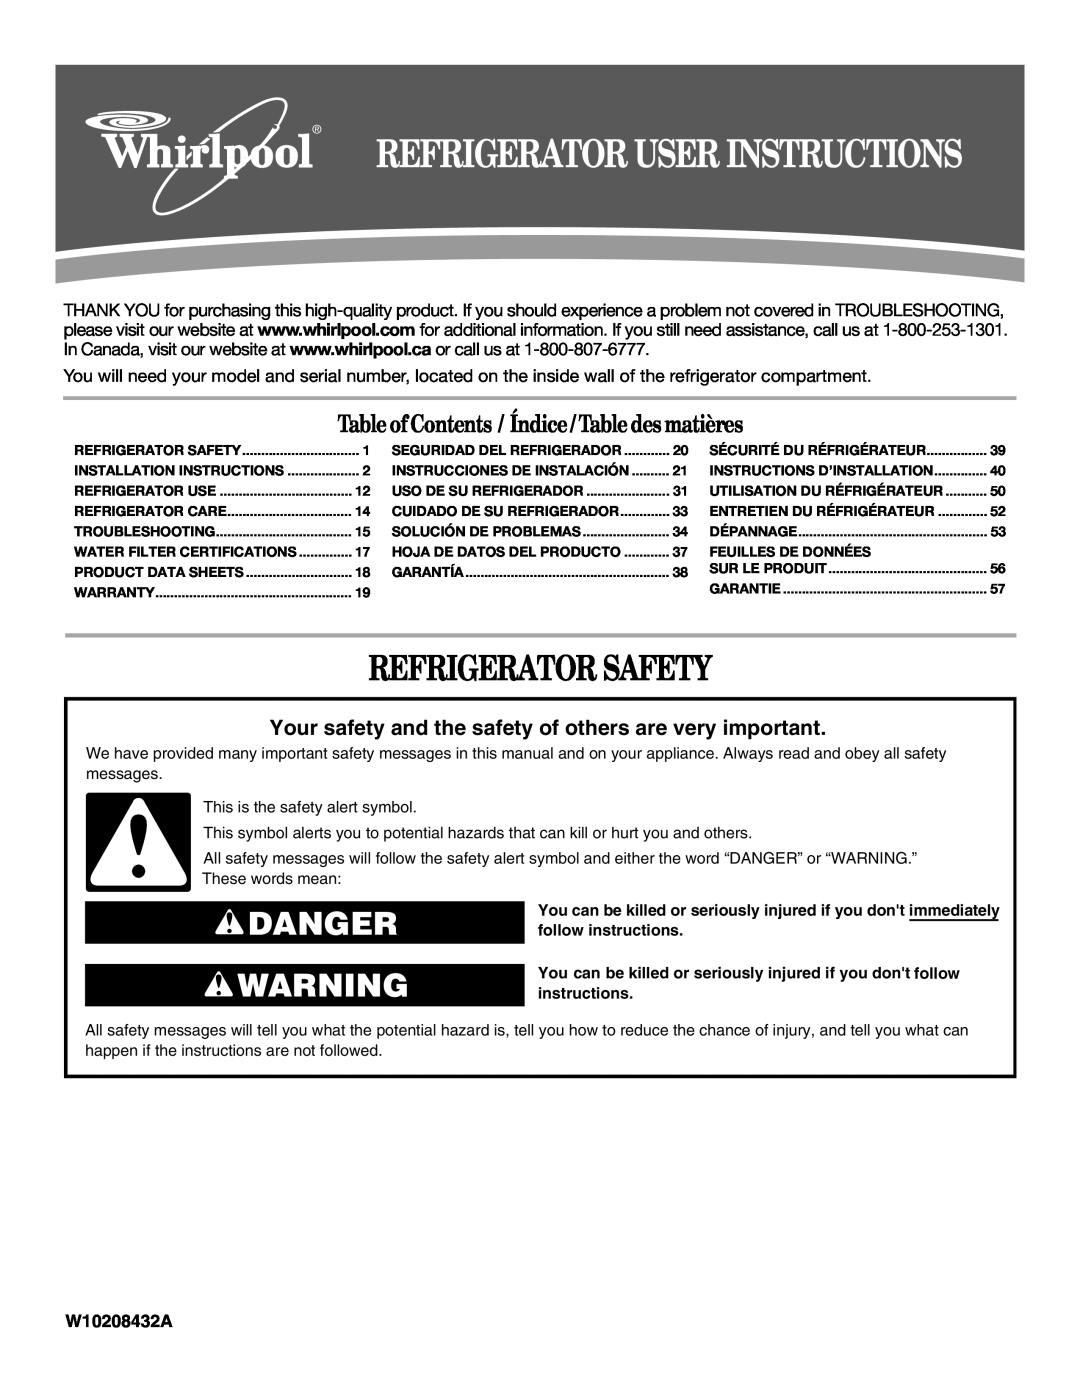 Whirlpool W10208431A installation instructions Refrigerator Safety, Danger, Table ofContents / Índice / Table des matières 